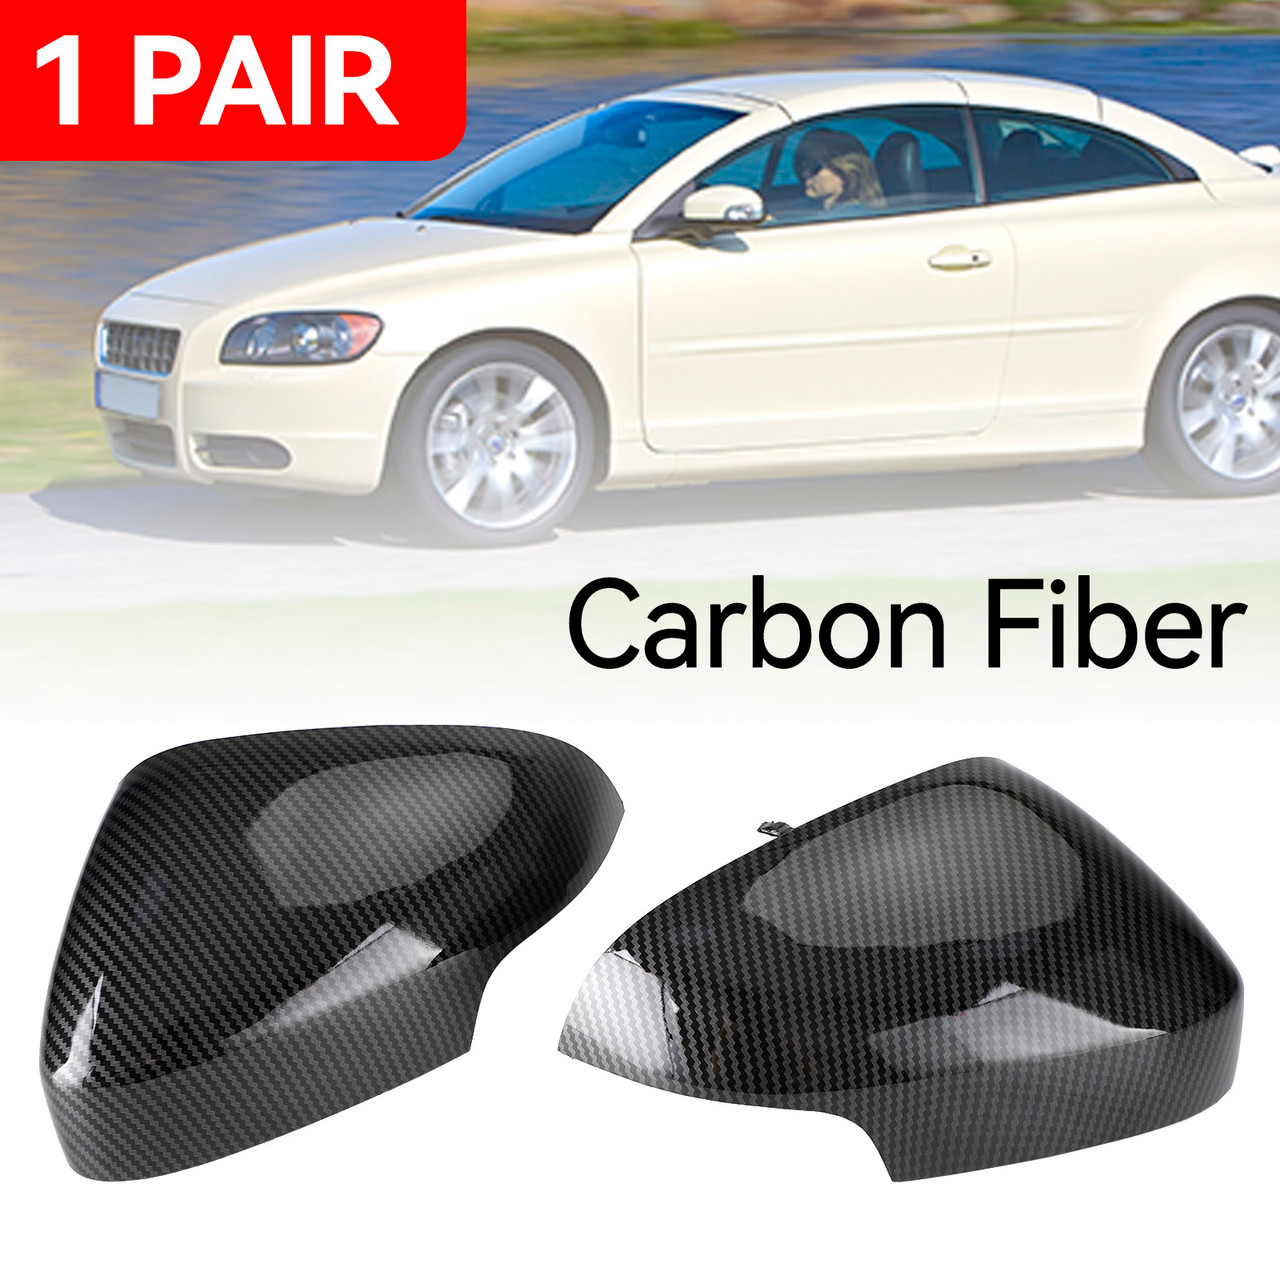 Carbon Fiber Rearview Side Mirror Cover Cap for Volvo S80 2008-2013